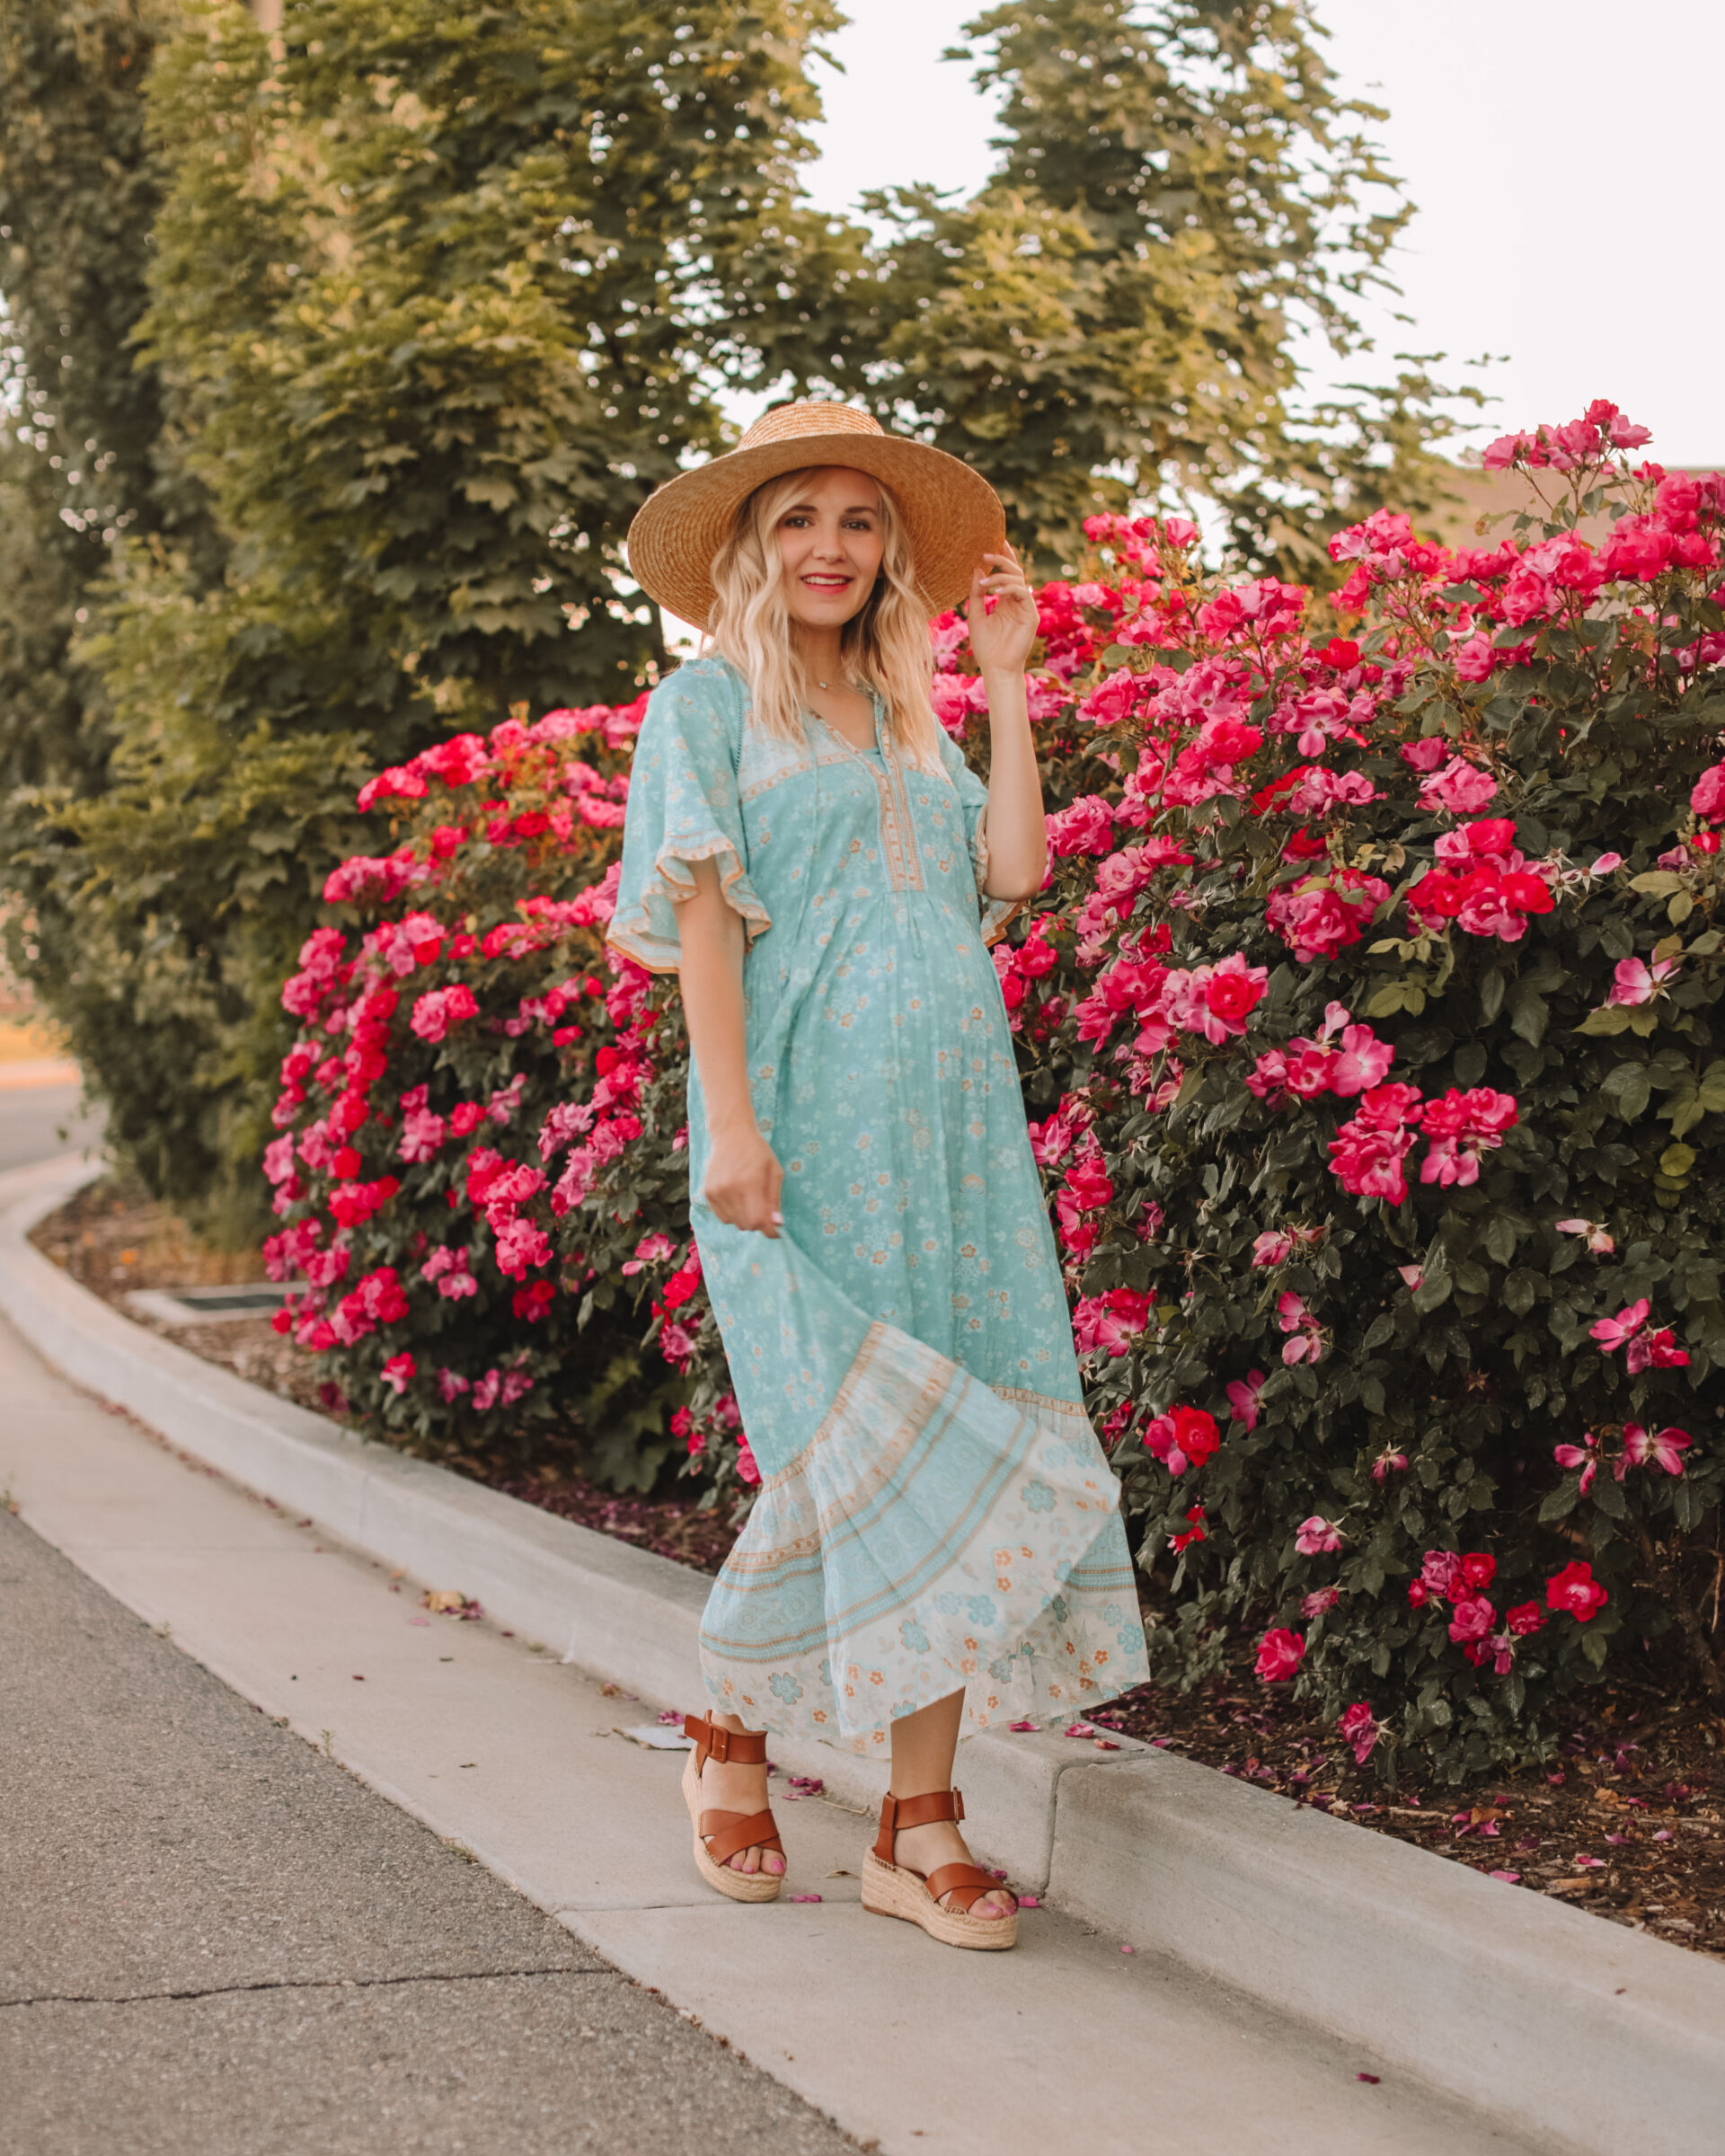 STRAW HATS + AFFORDABLE SUMMER STYLE FINDS - Stripes in Bloom